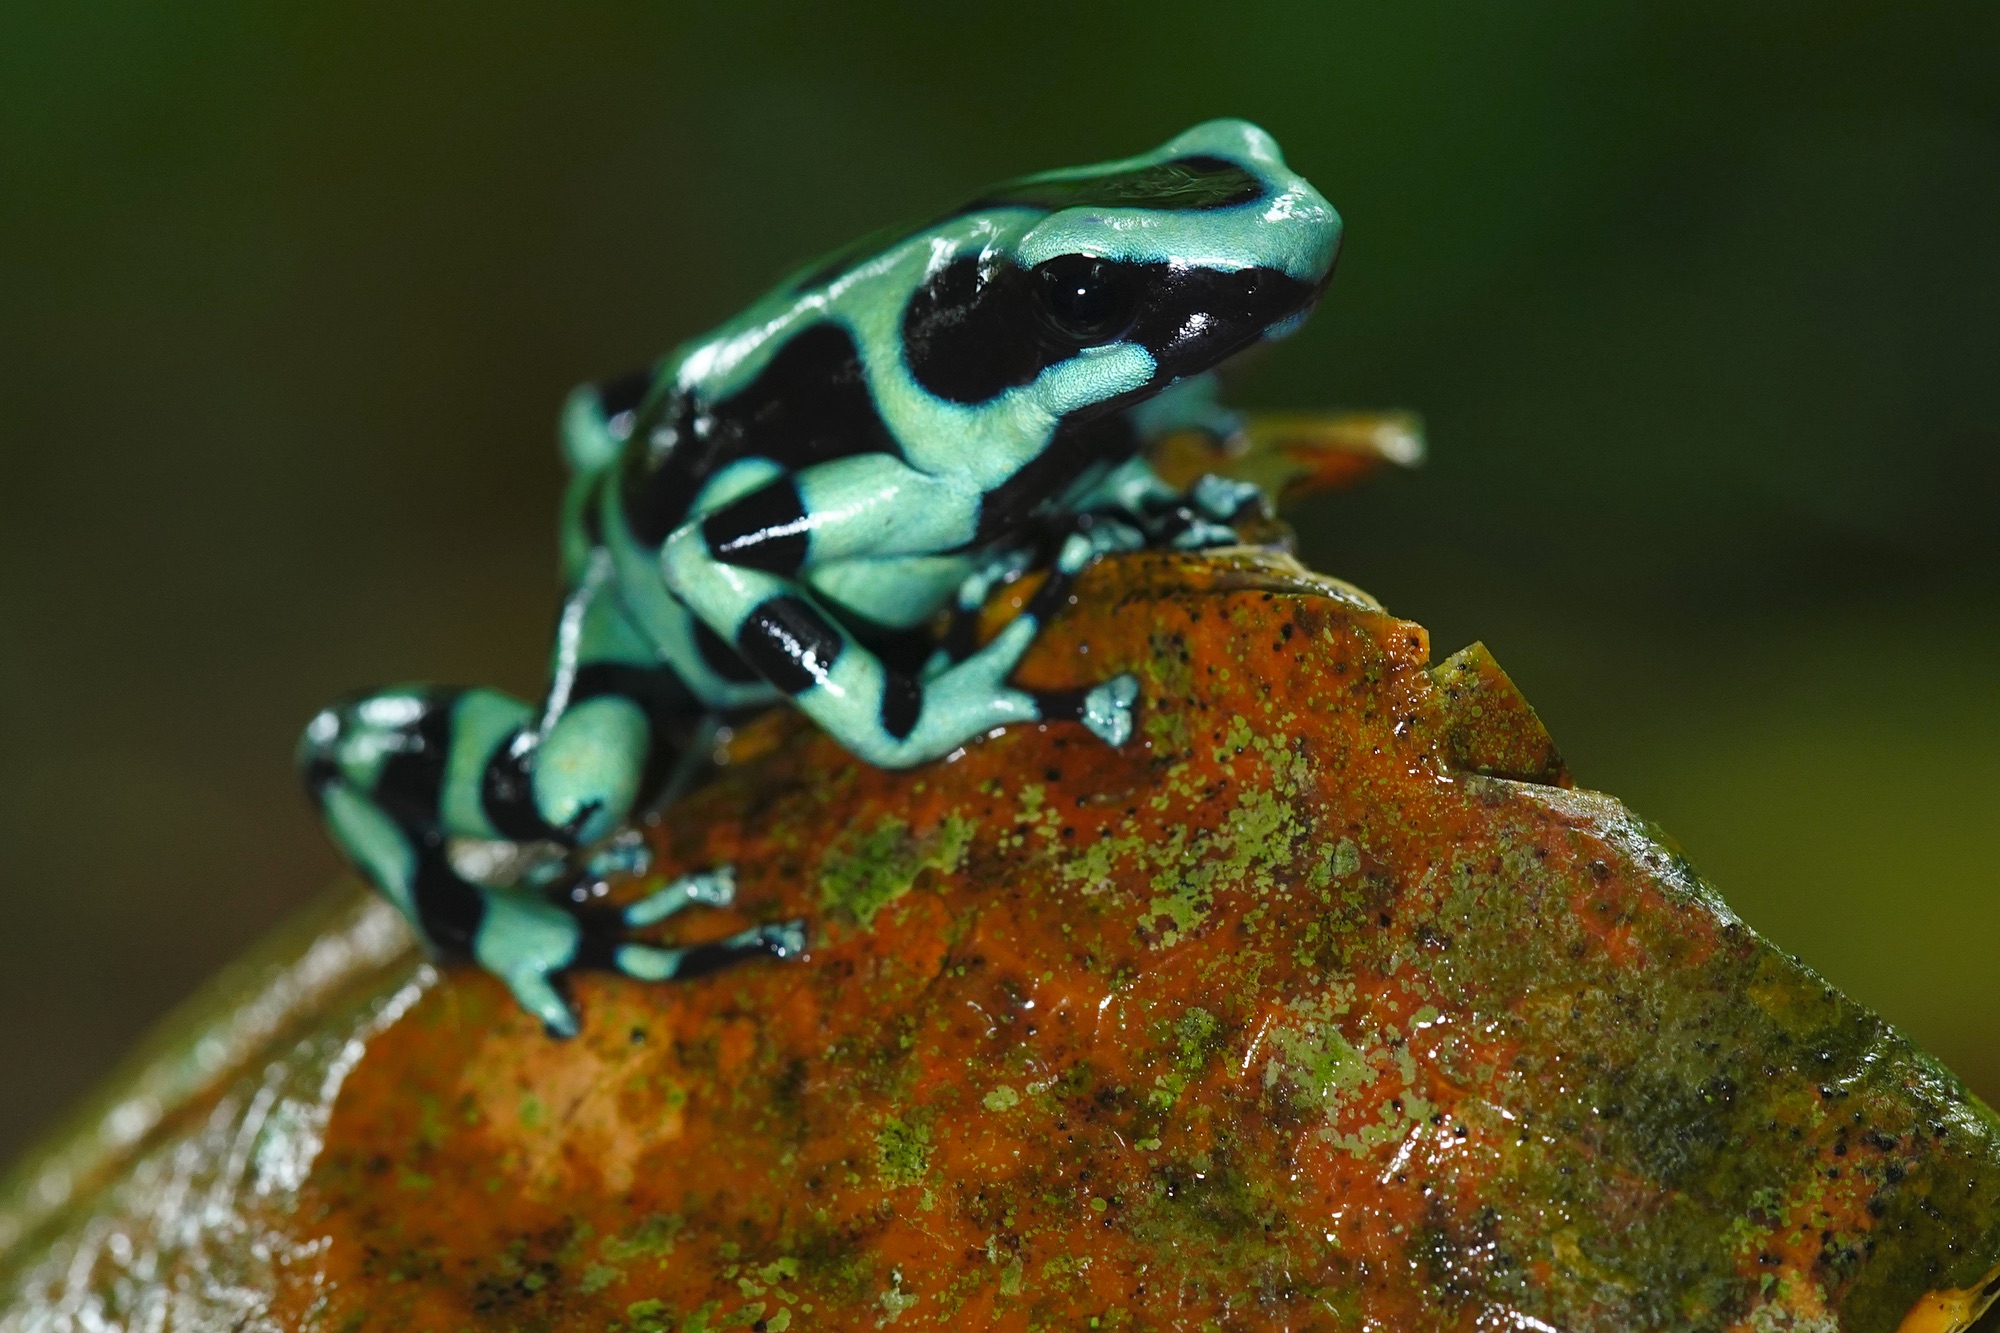 Costa Rica photo tour with Don Mammoser - green and black frog